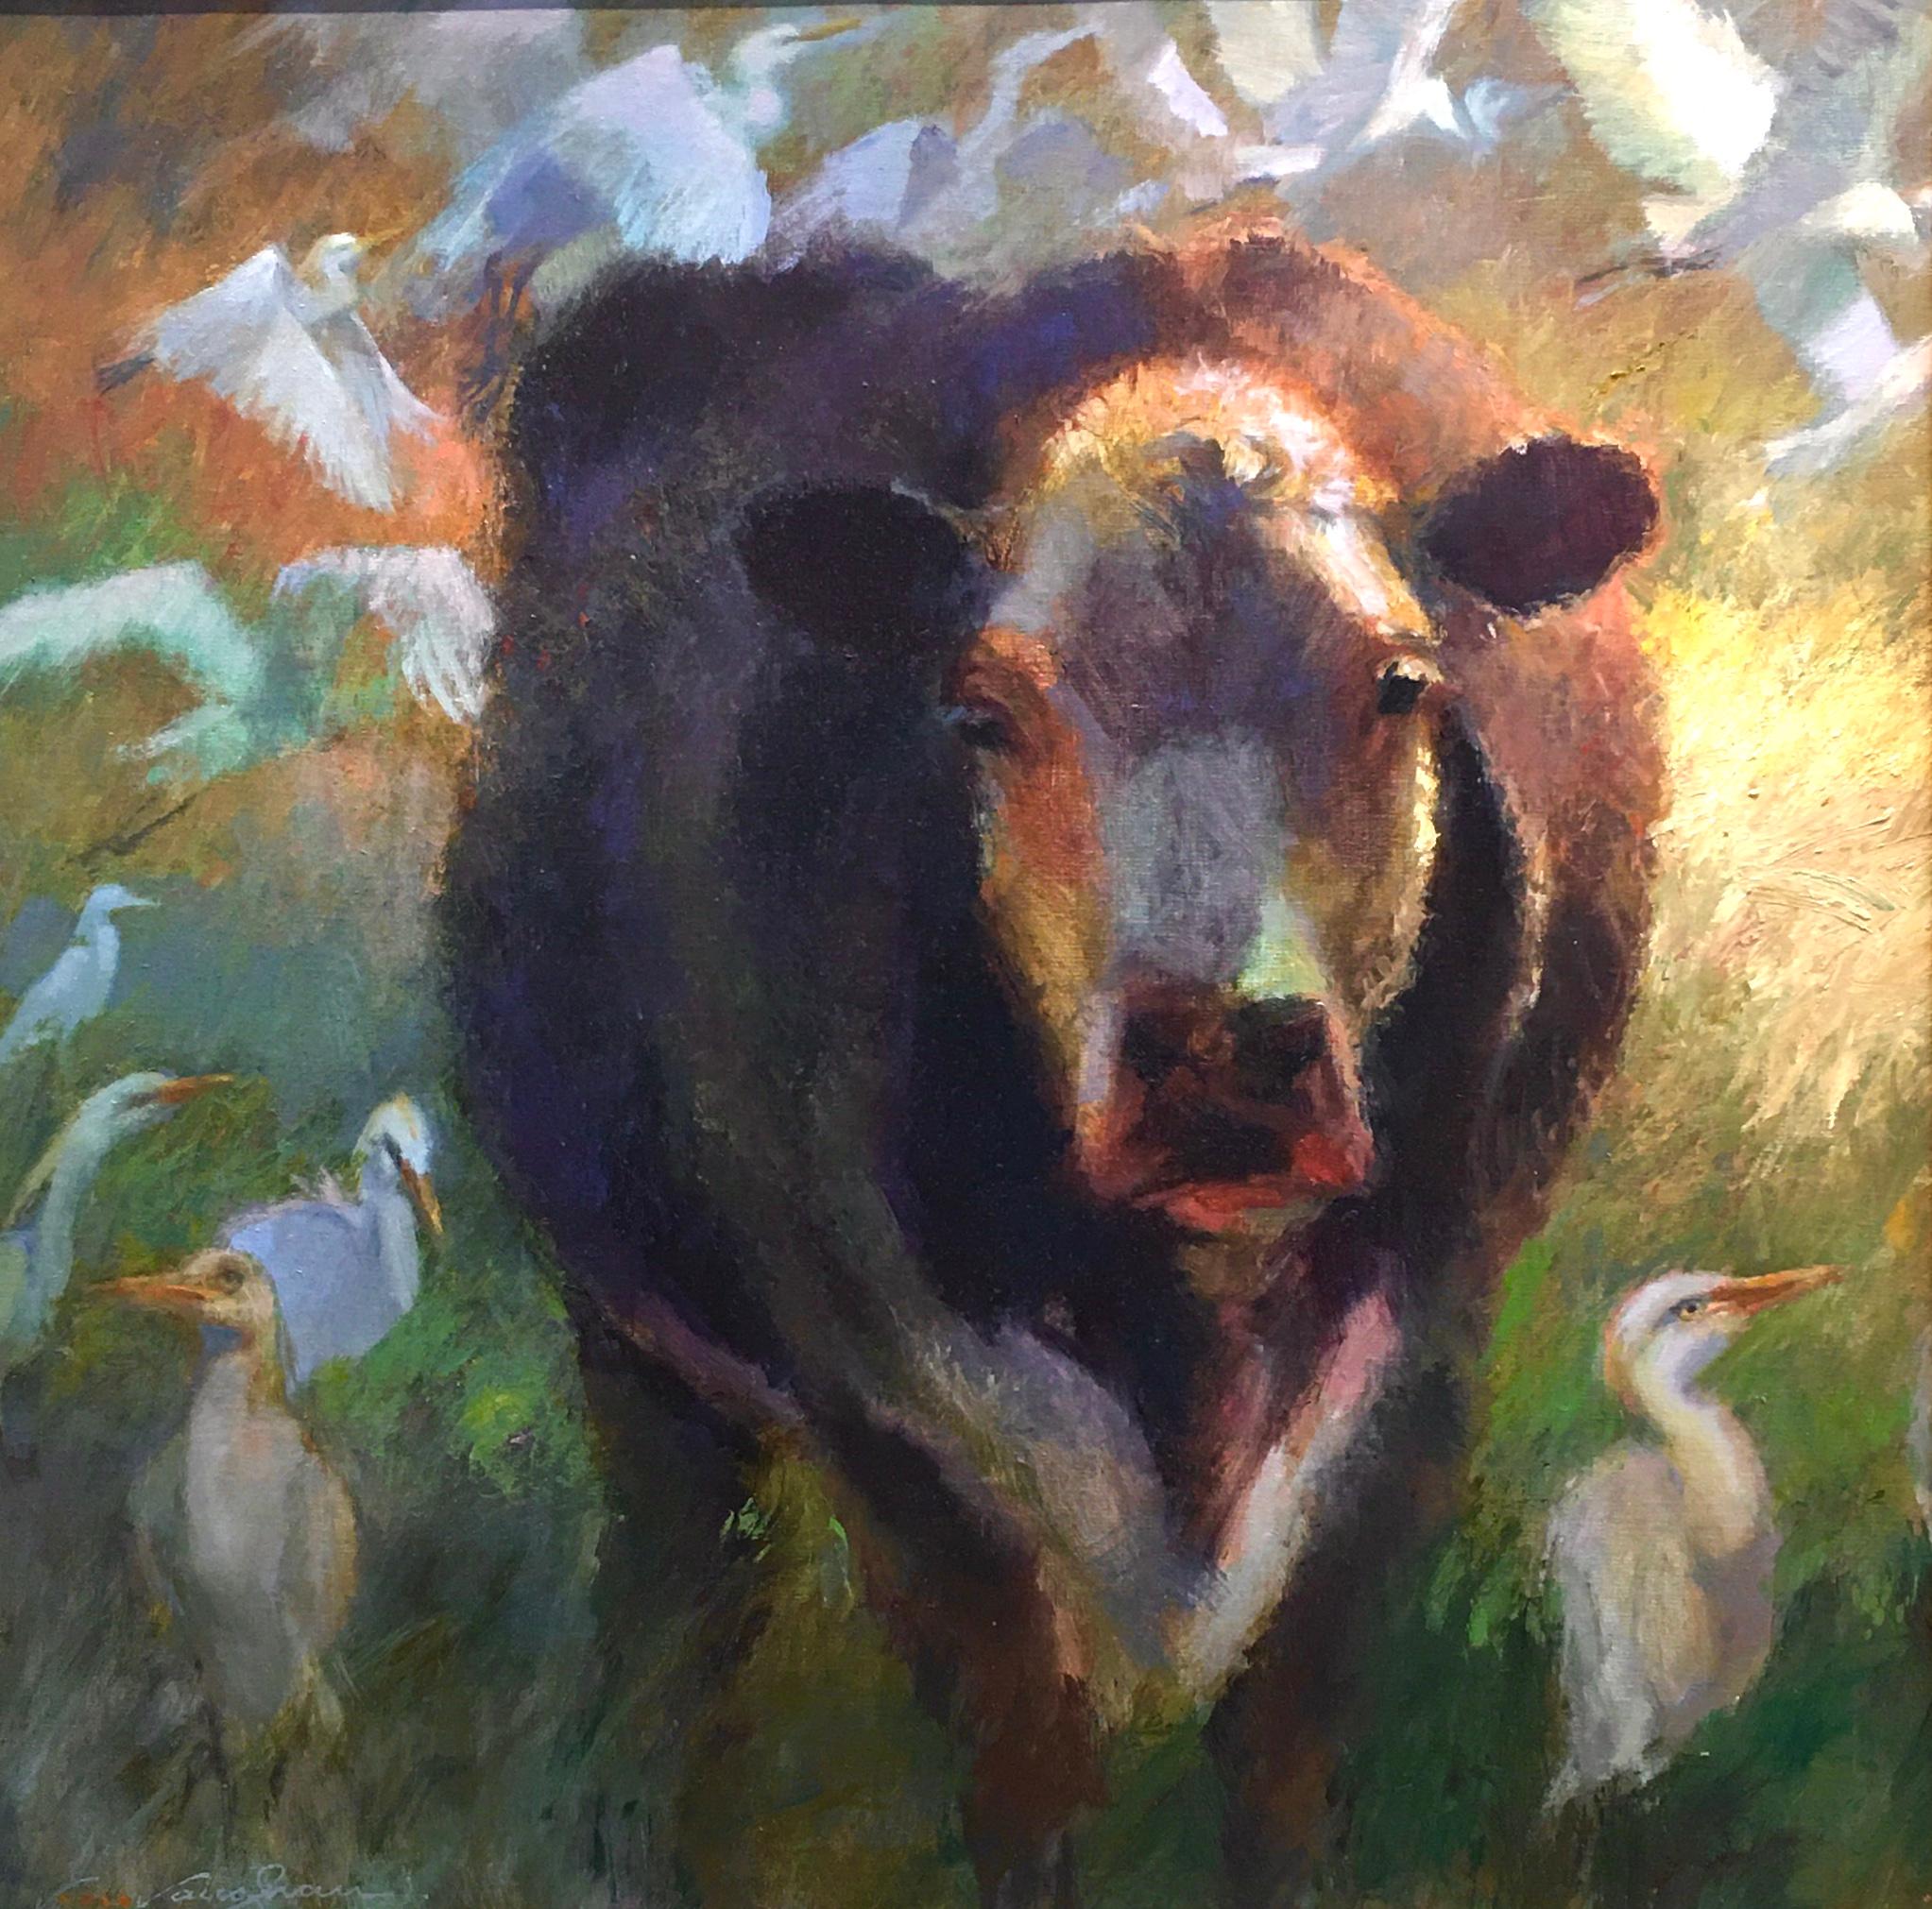 Virginia Vaughan  Animal Painting - With Few Egrets, Texas Cattle, Impressionism Texas Ranches, Texas Artist, No Egrets